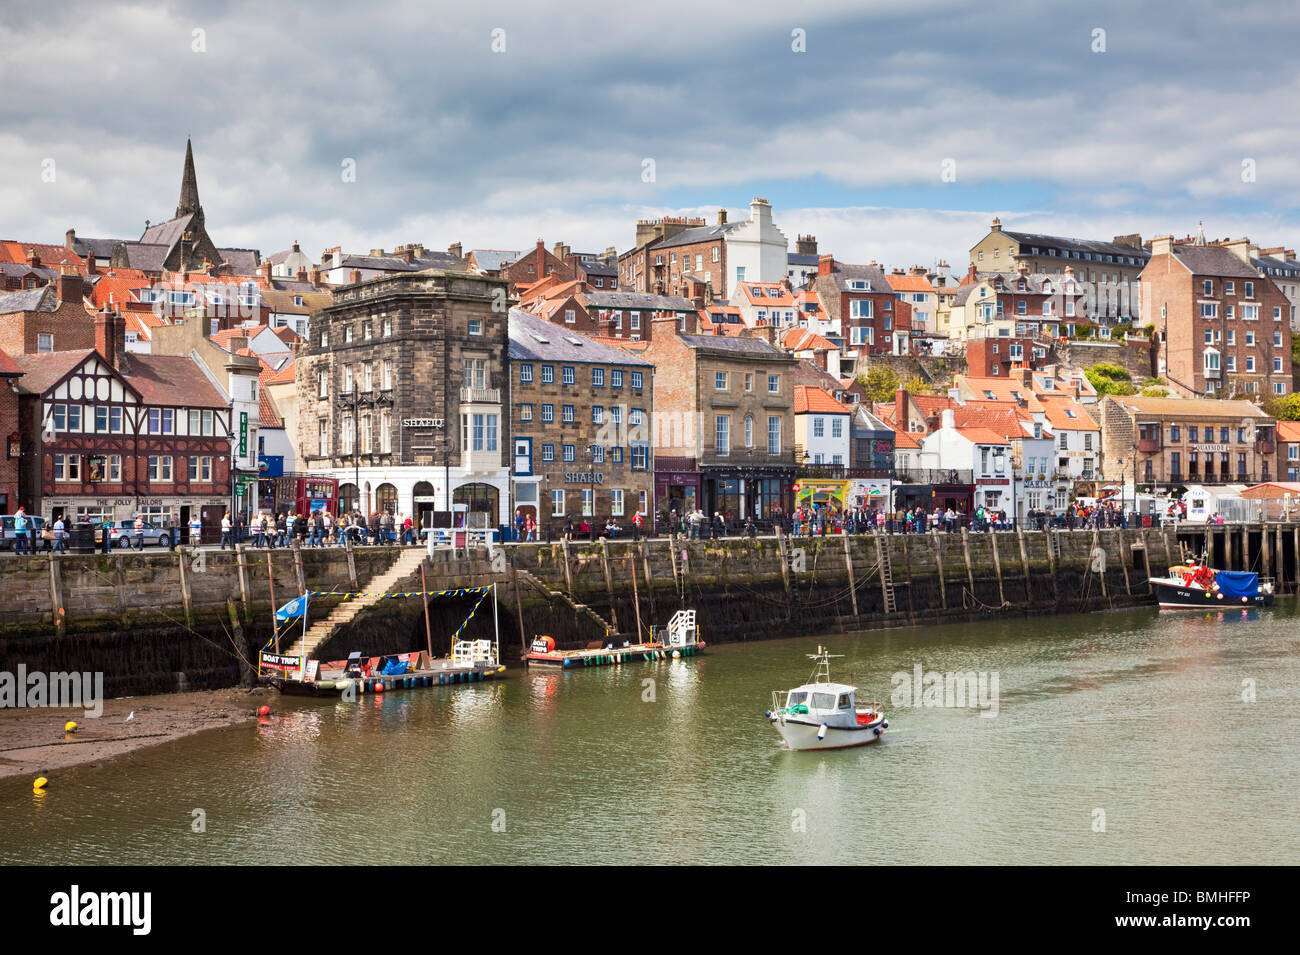 Tourists on Whitby Harbour overlooking the River Esk, Whitby, North Yorkshire, England, UK Stock Photo